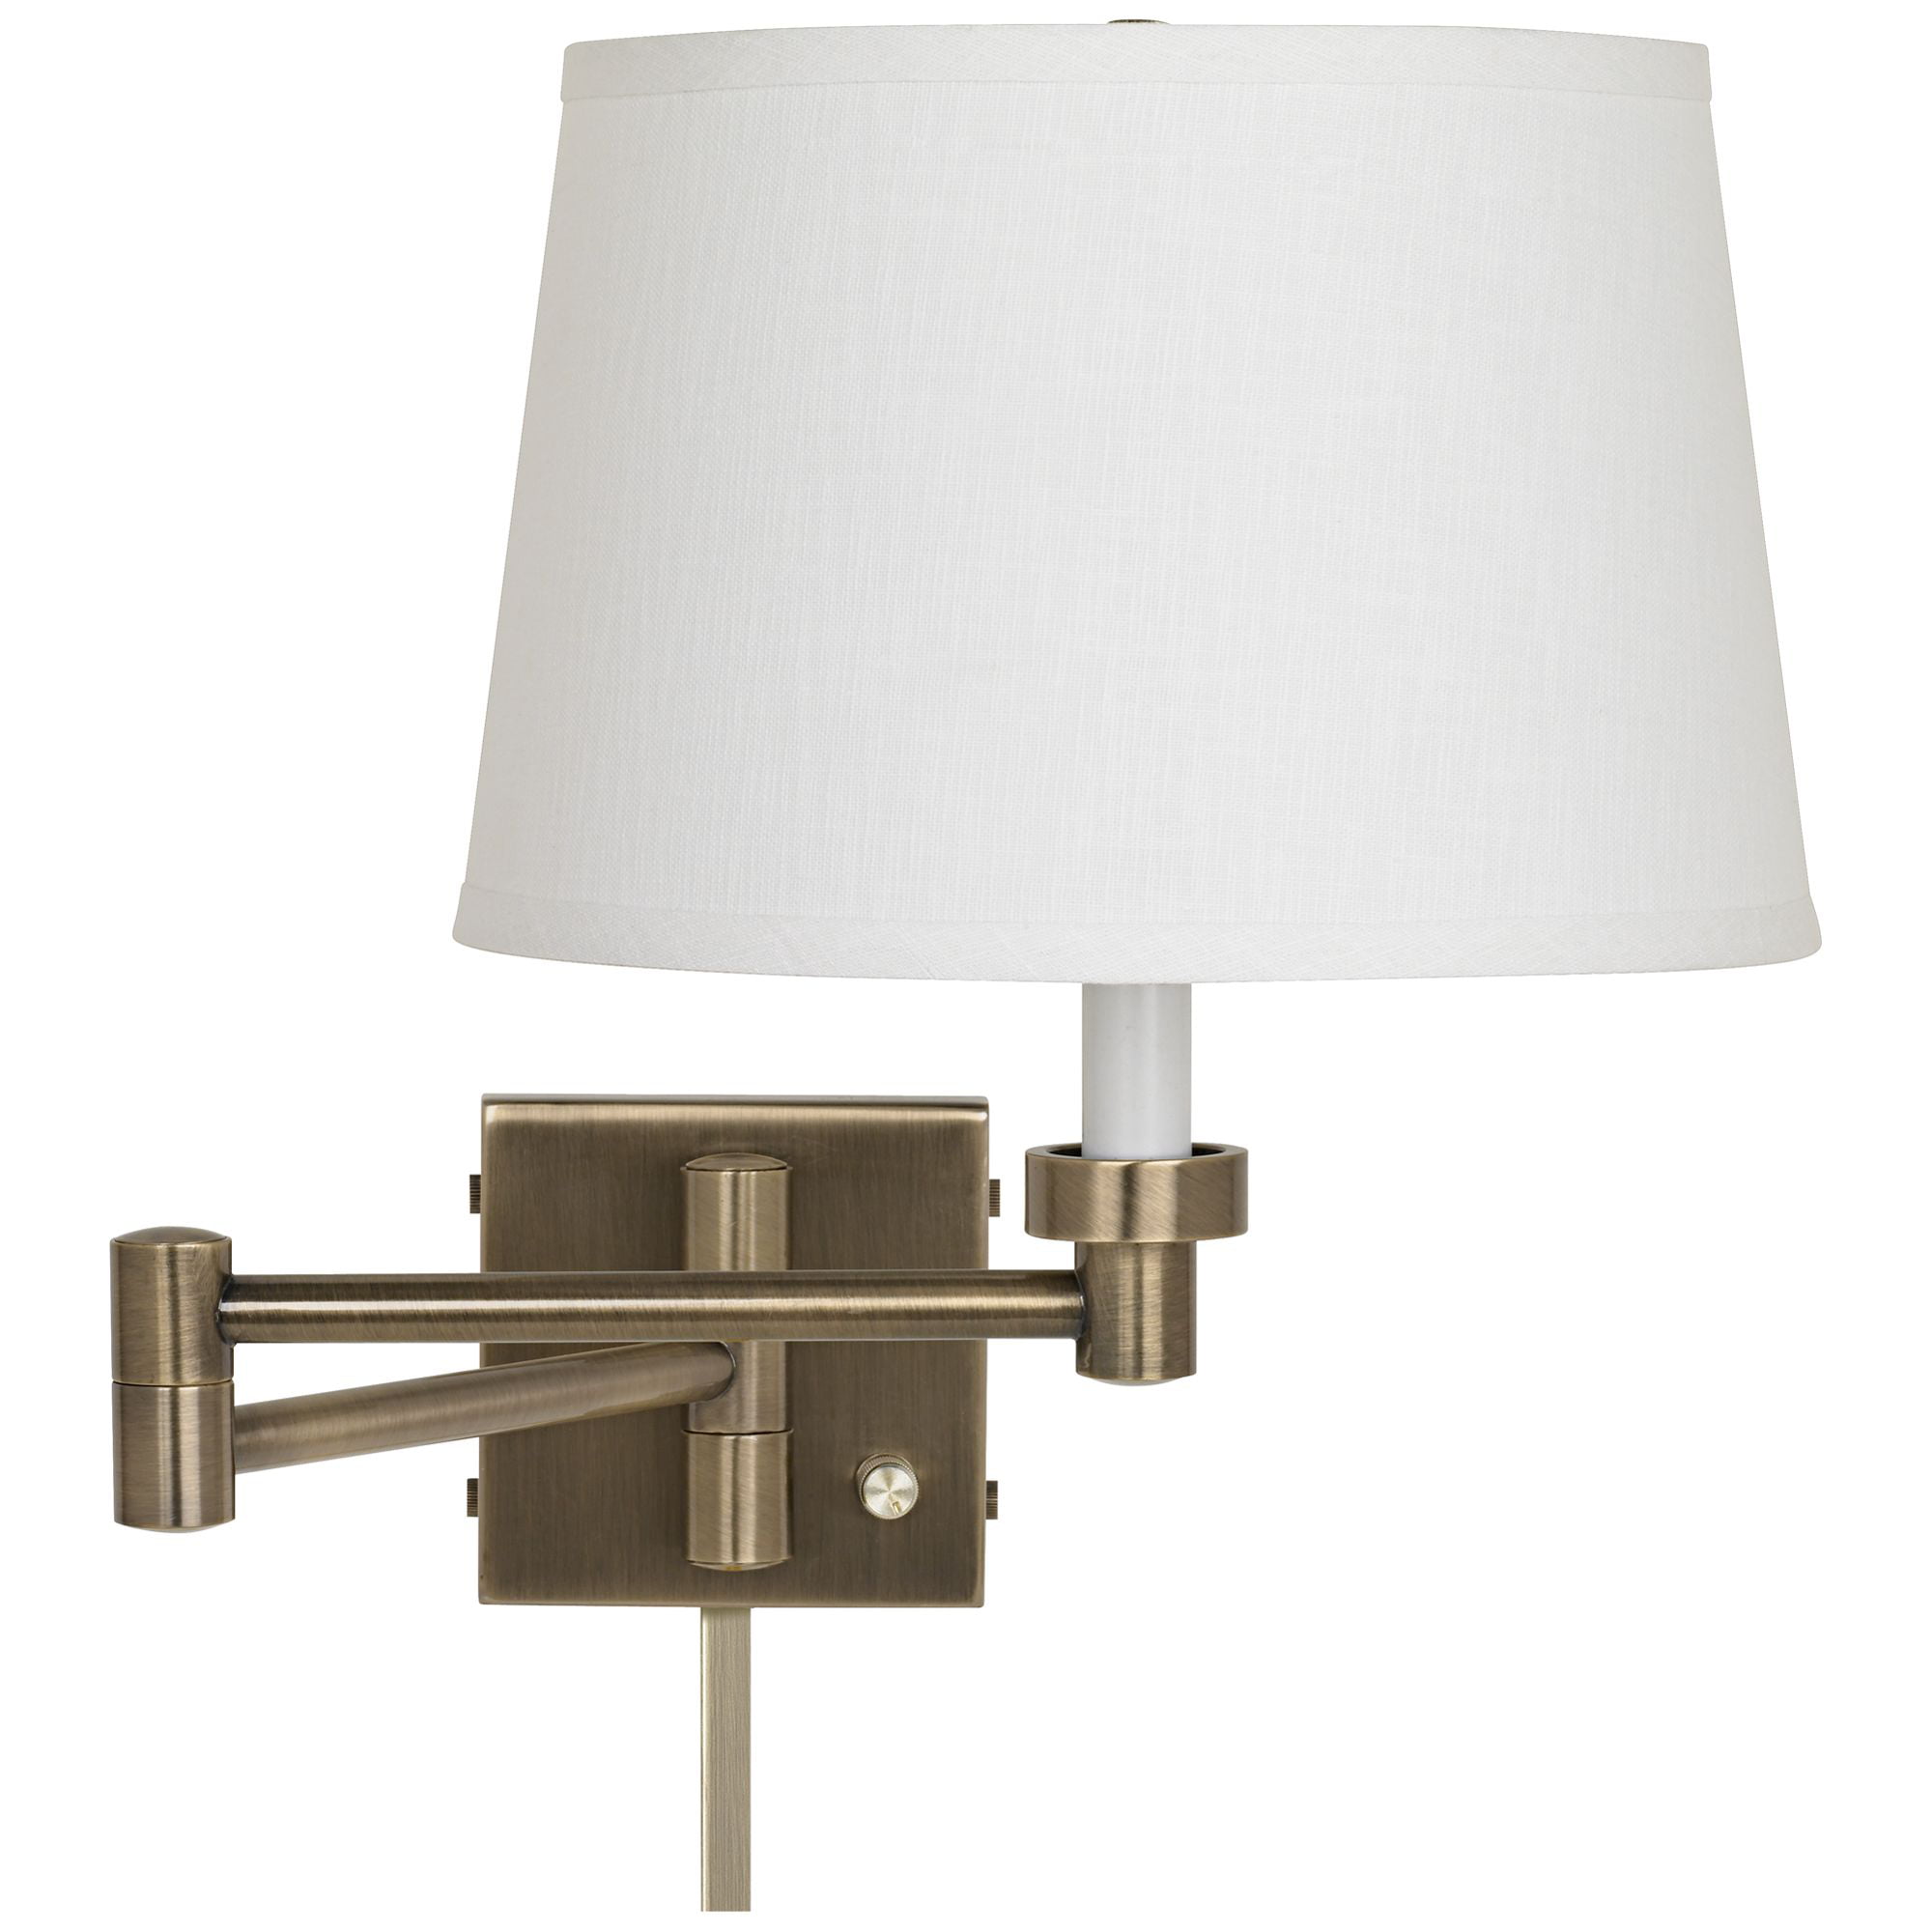 Barnes and Ivy Modern Swing Arm Wall Lamp with Cord Cover Antique Brass Plug-In Light Linen Drum Shade for - Walmart.com